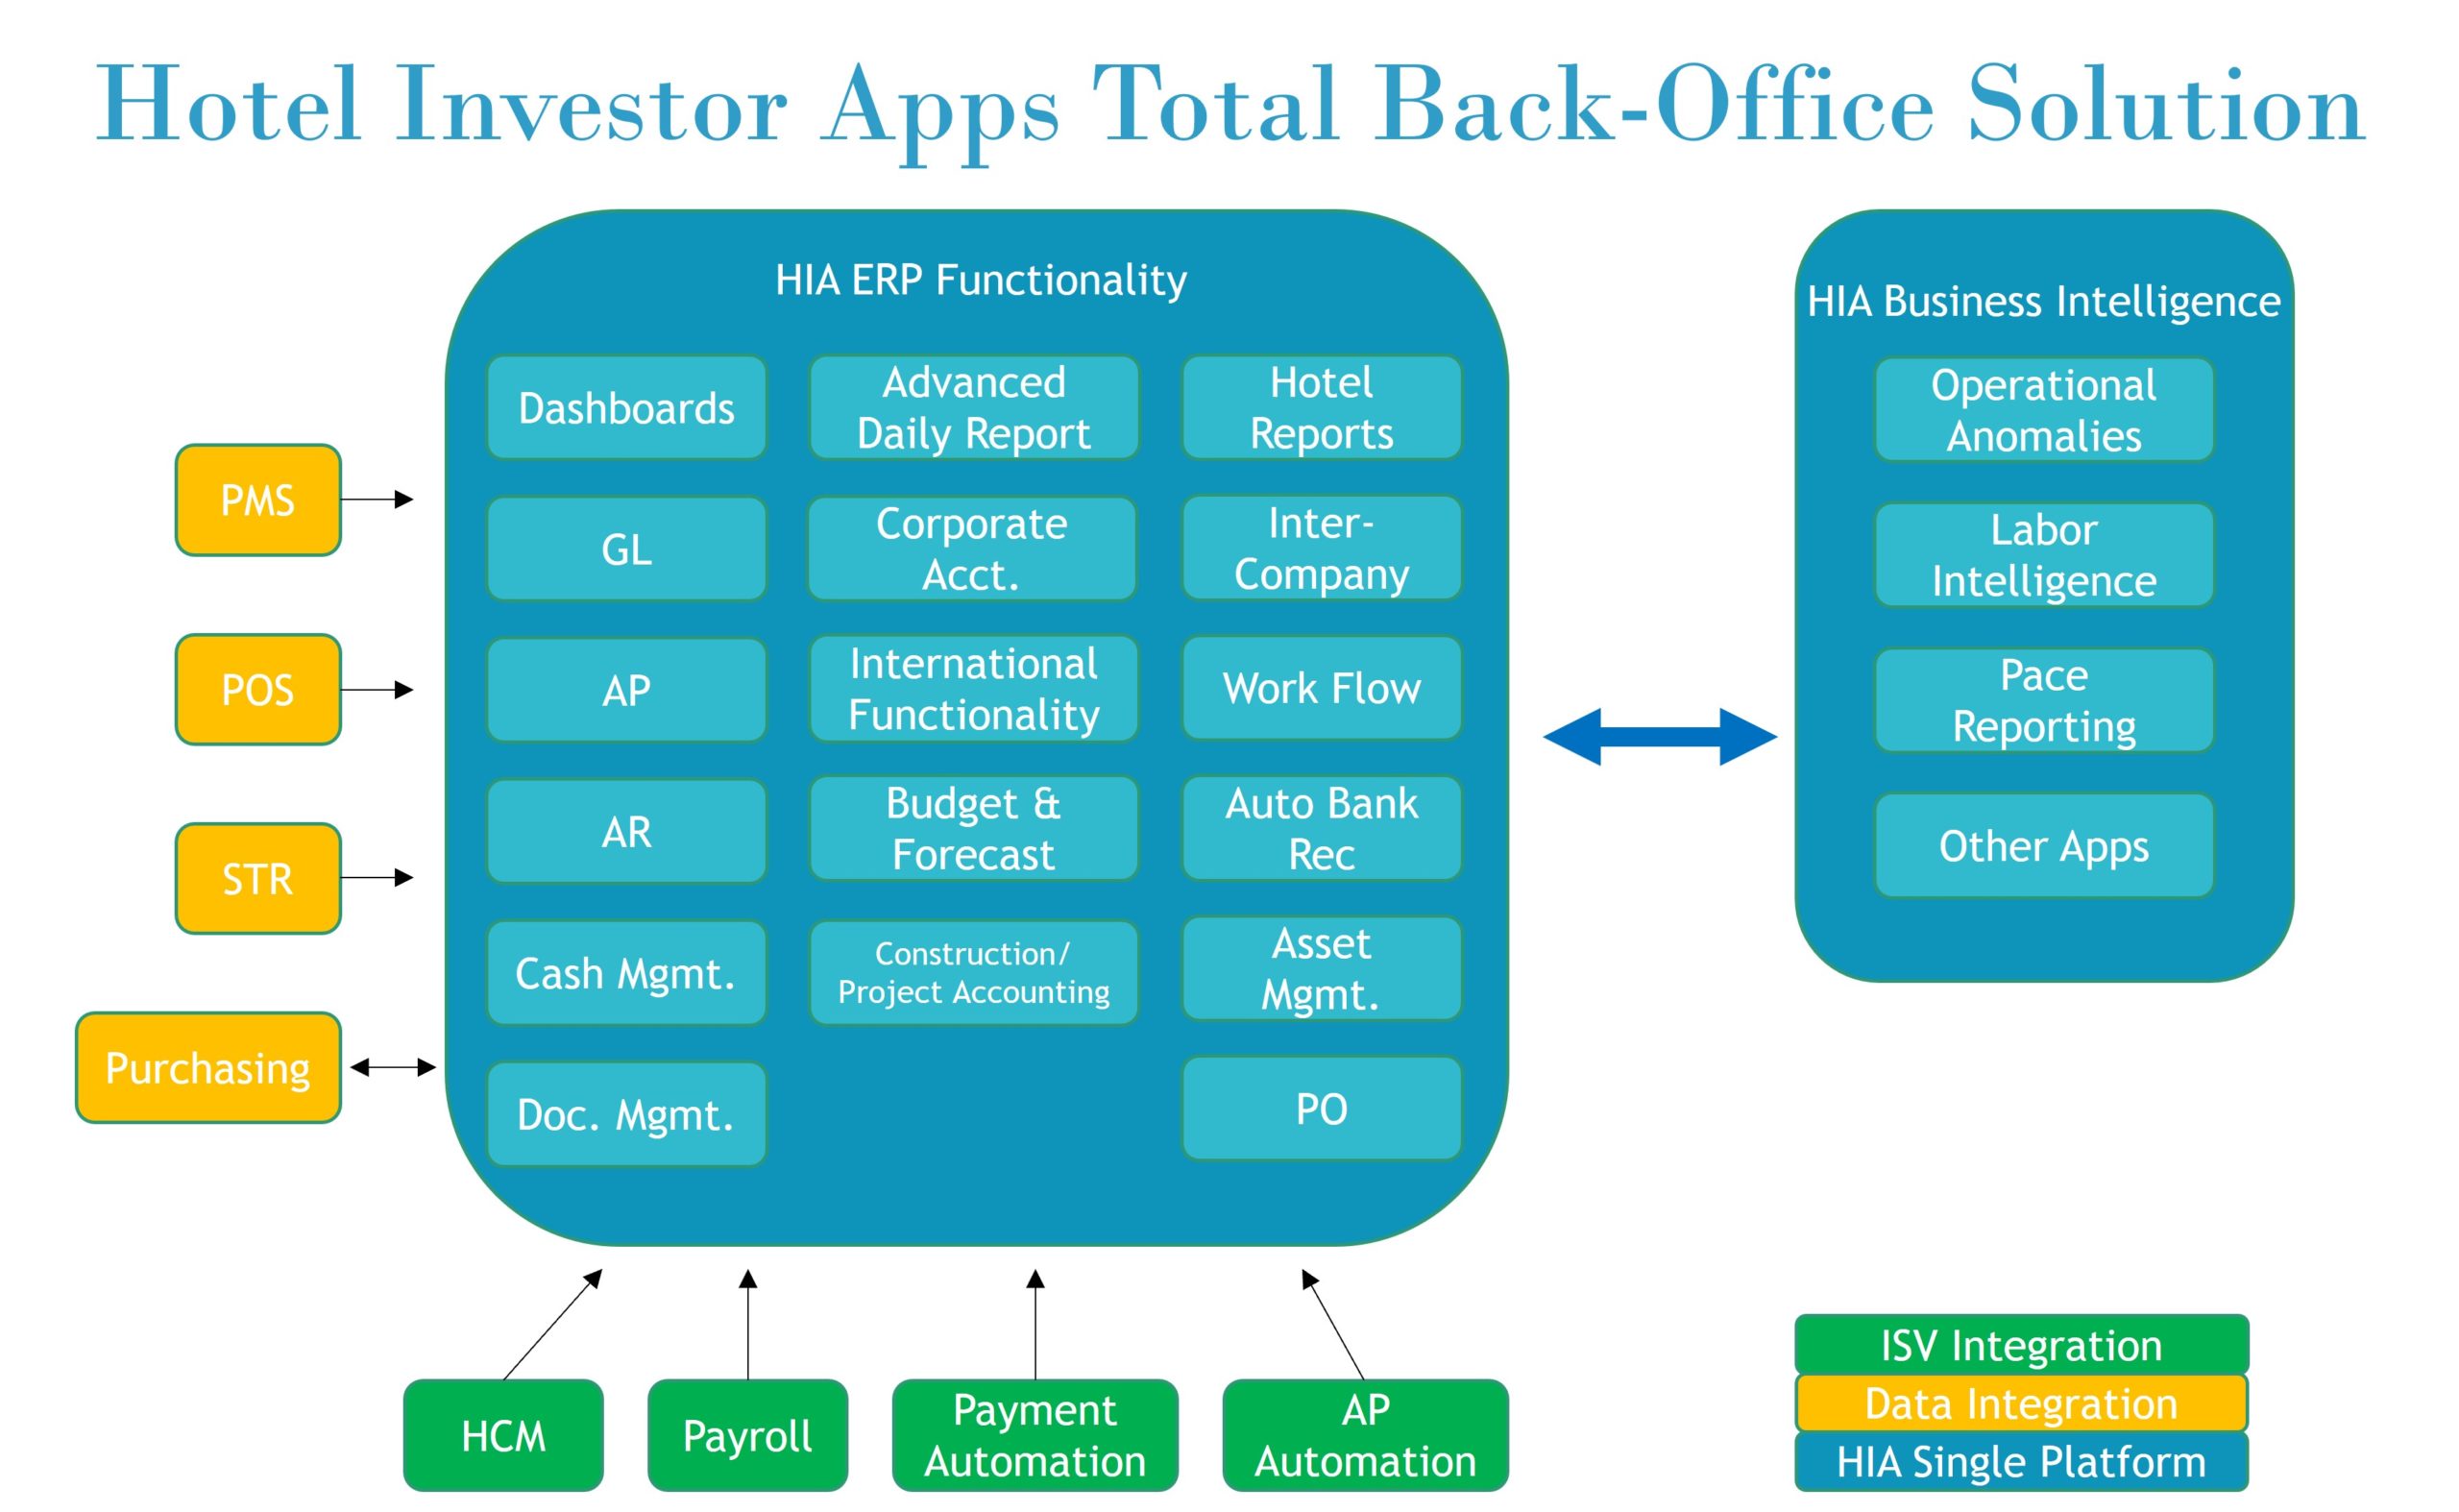 Hotel Investor Apps ERP functionality and integrated software solutions